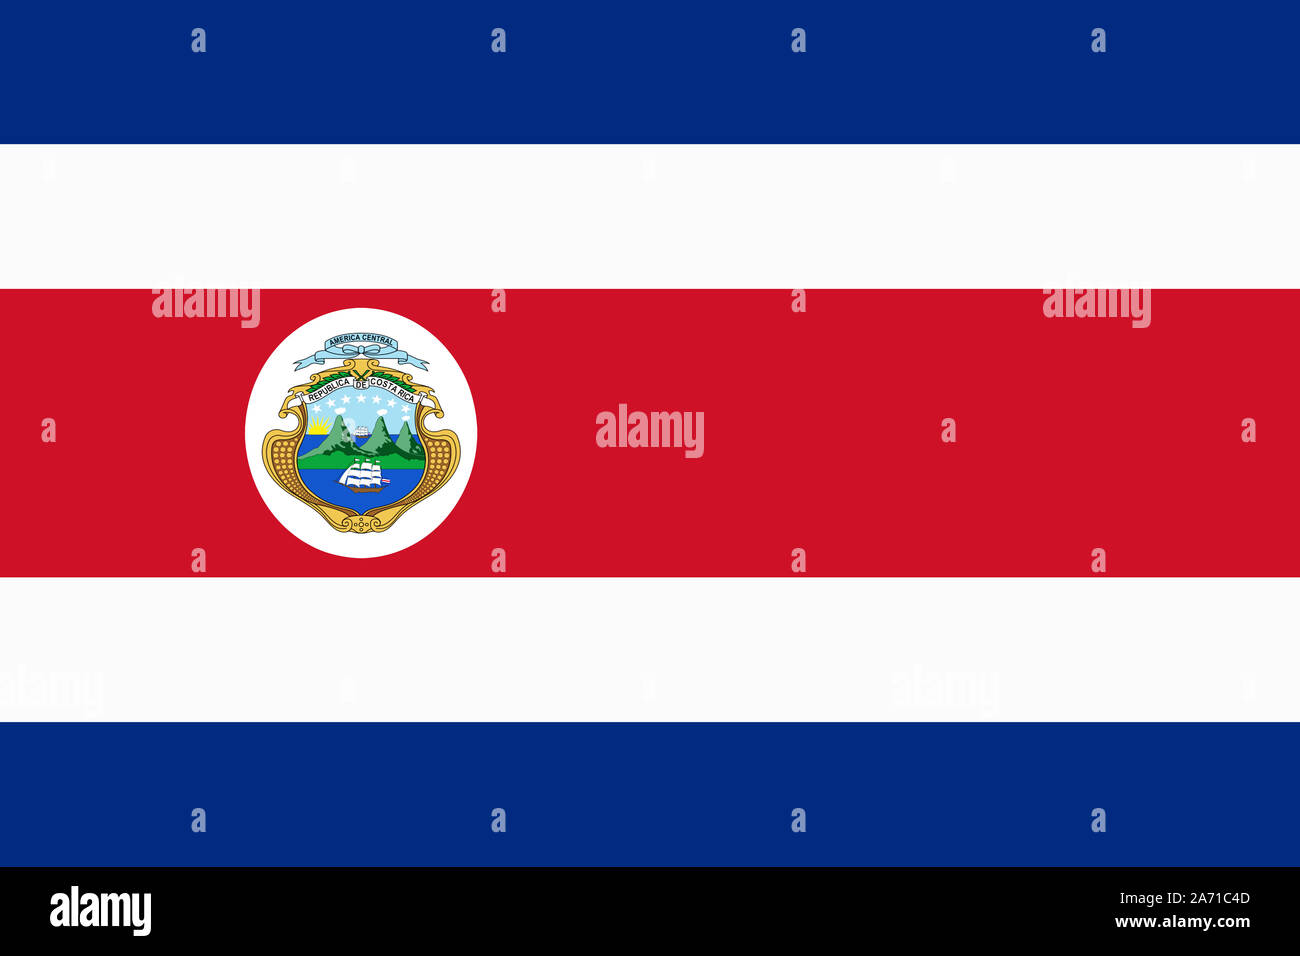 A Costa Rica flag background illustration red white blue stripes Stock Photo